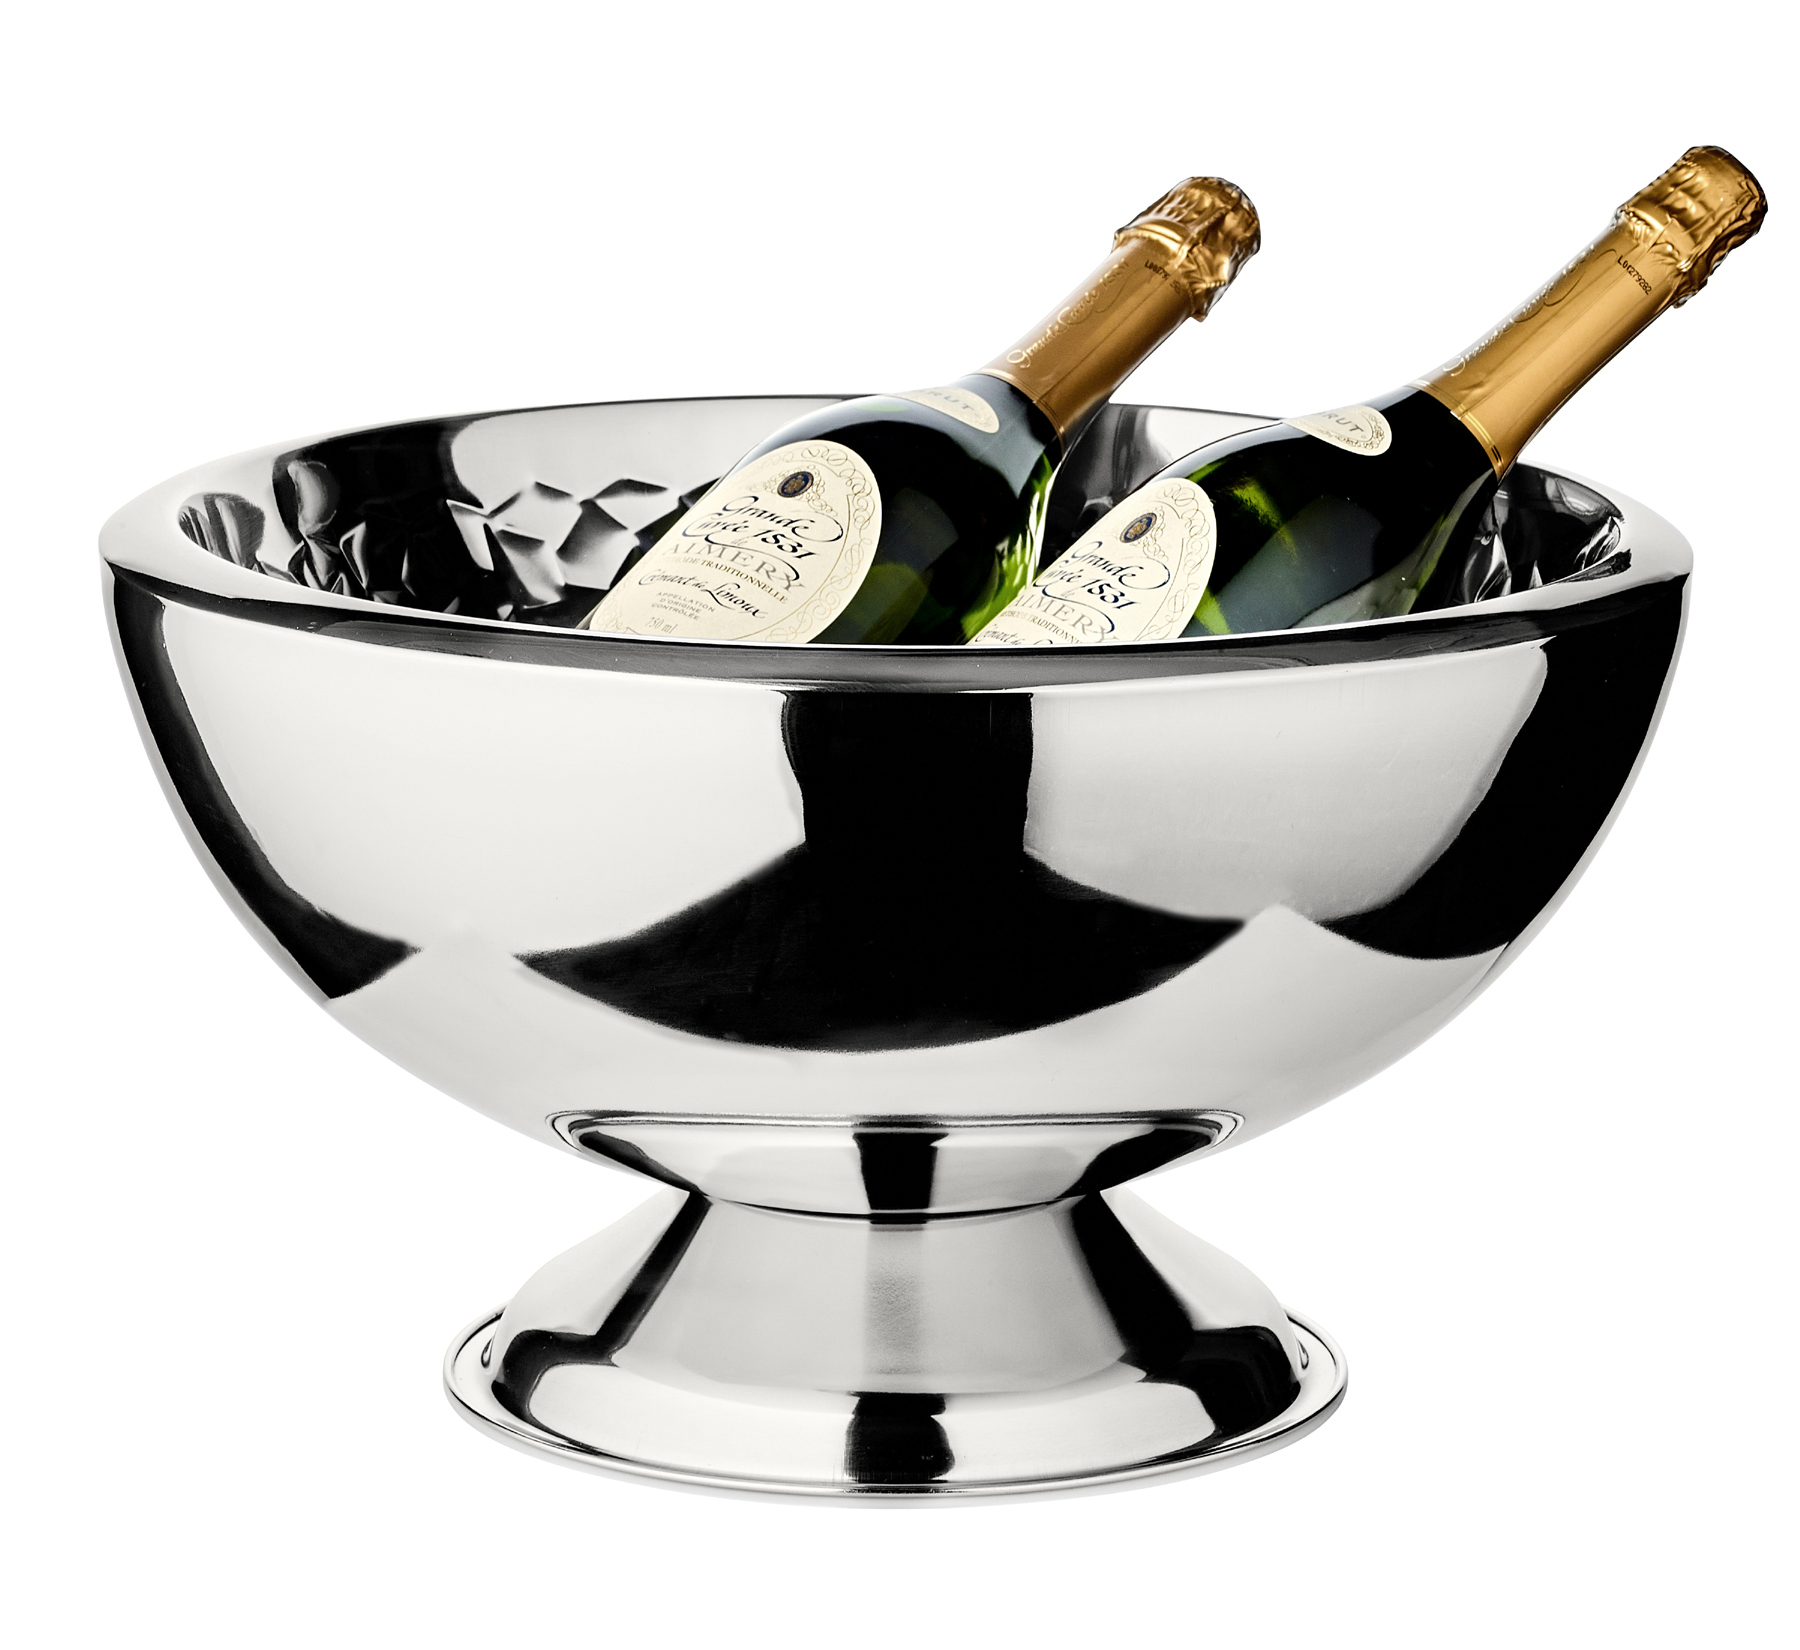 Stainless Steel Champagne Bowl Champagne Cooler Champagne Bowl Champagne Cooler Bottle Cooler 